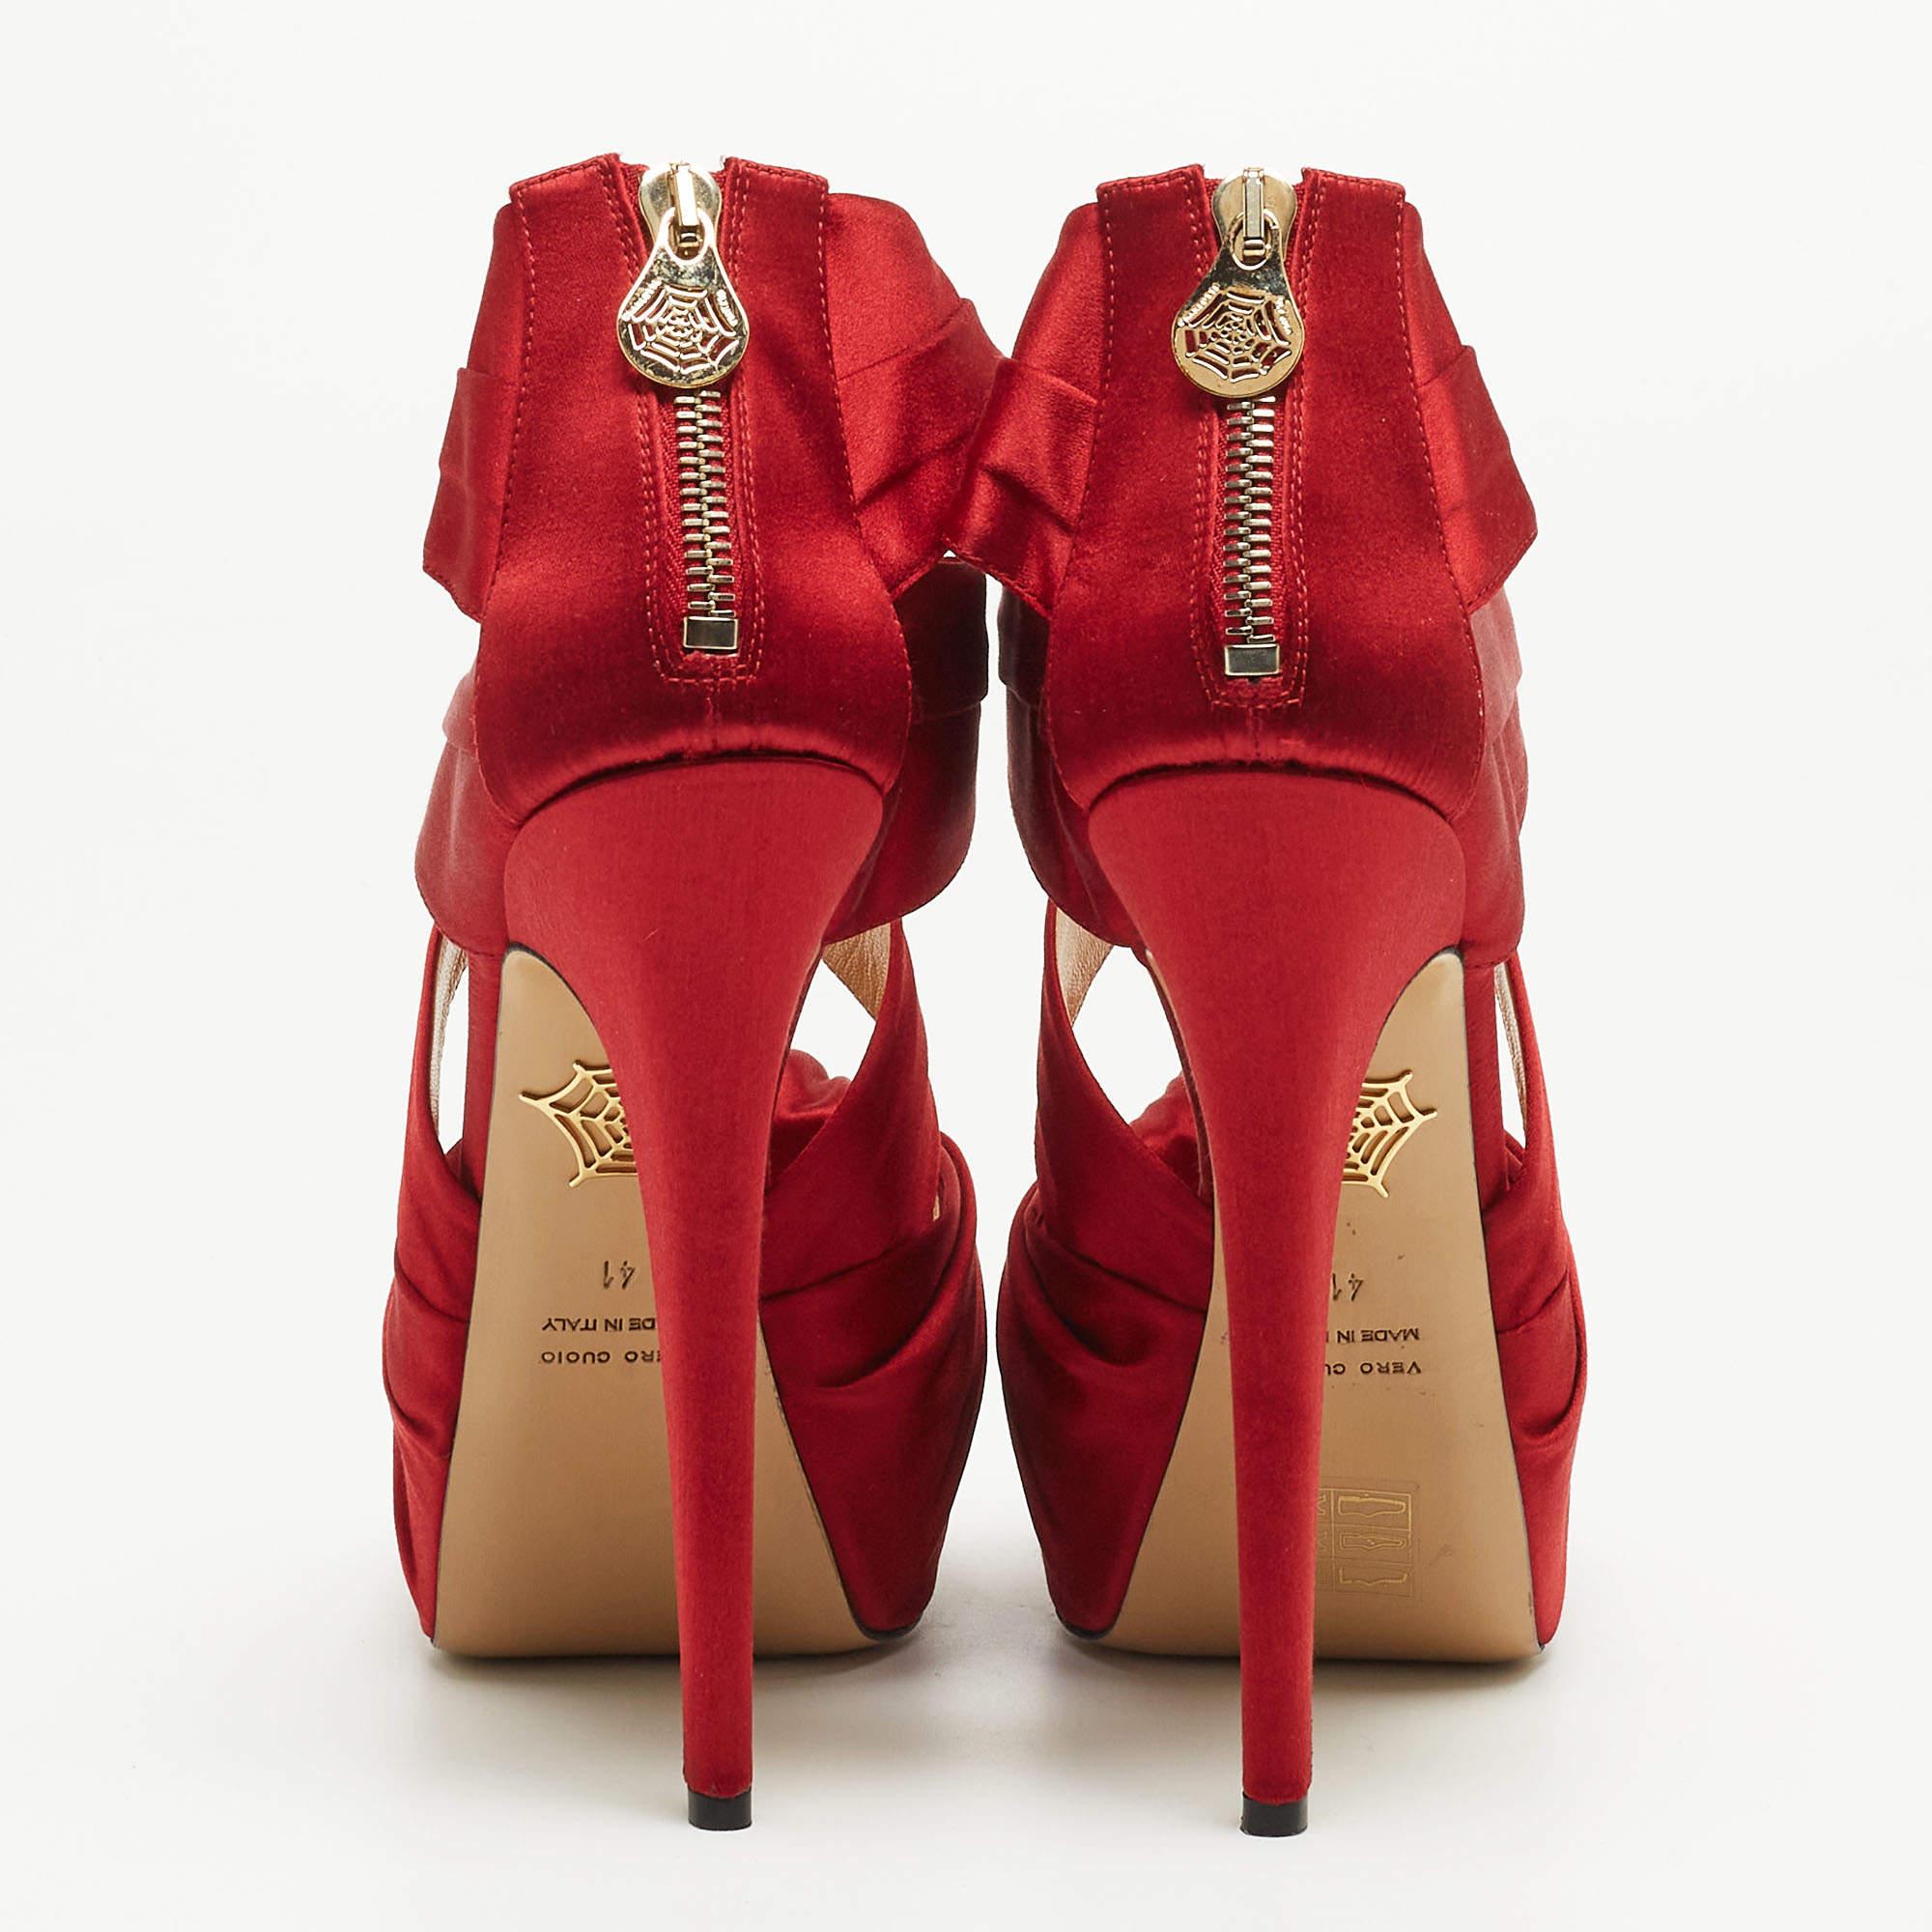 Charlotte Olympia Red Satin Andrea Knotted Platform Sandals Size 41 4